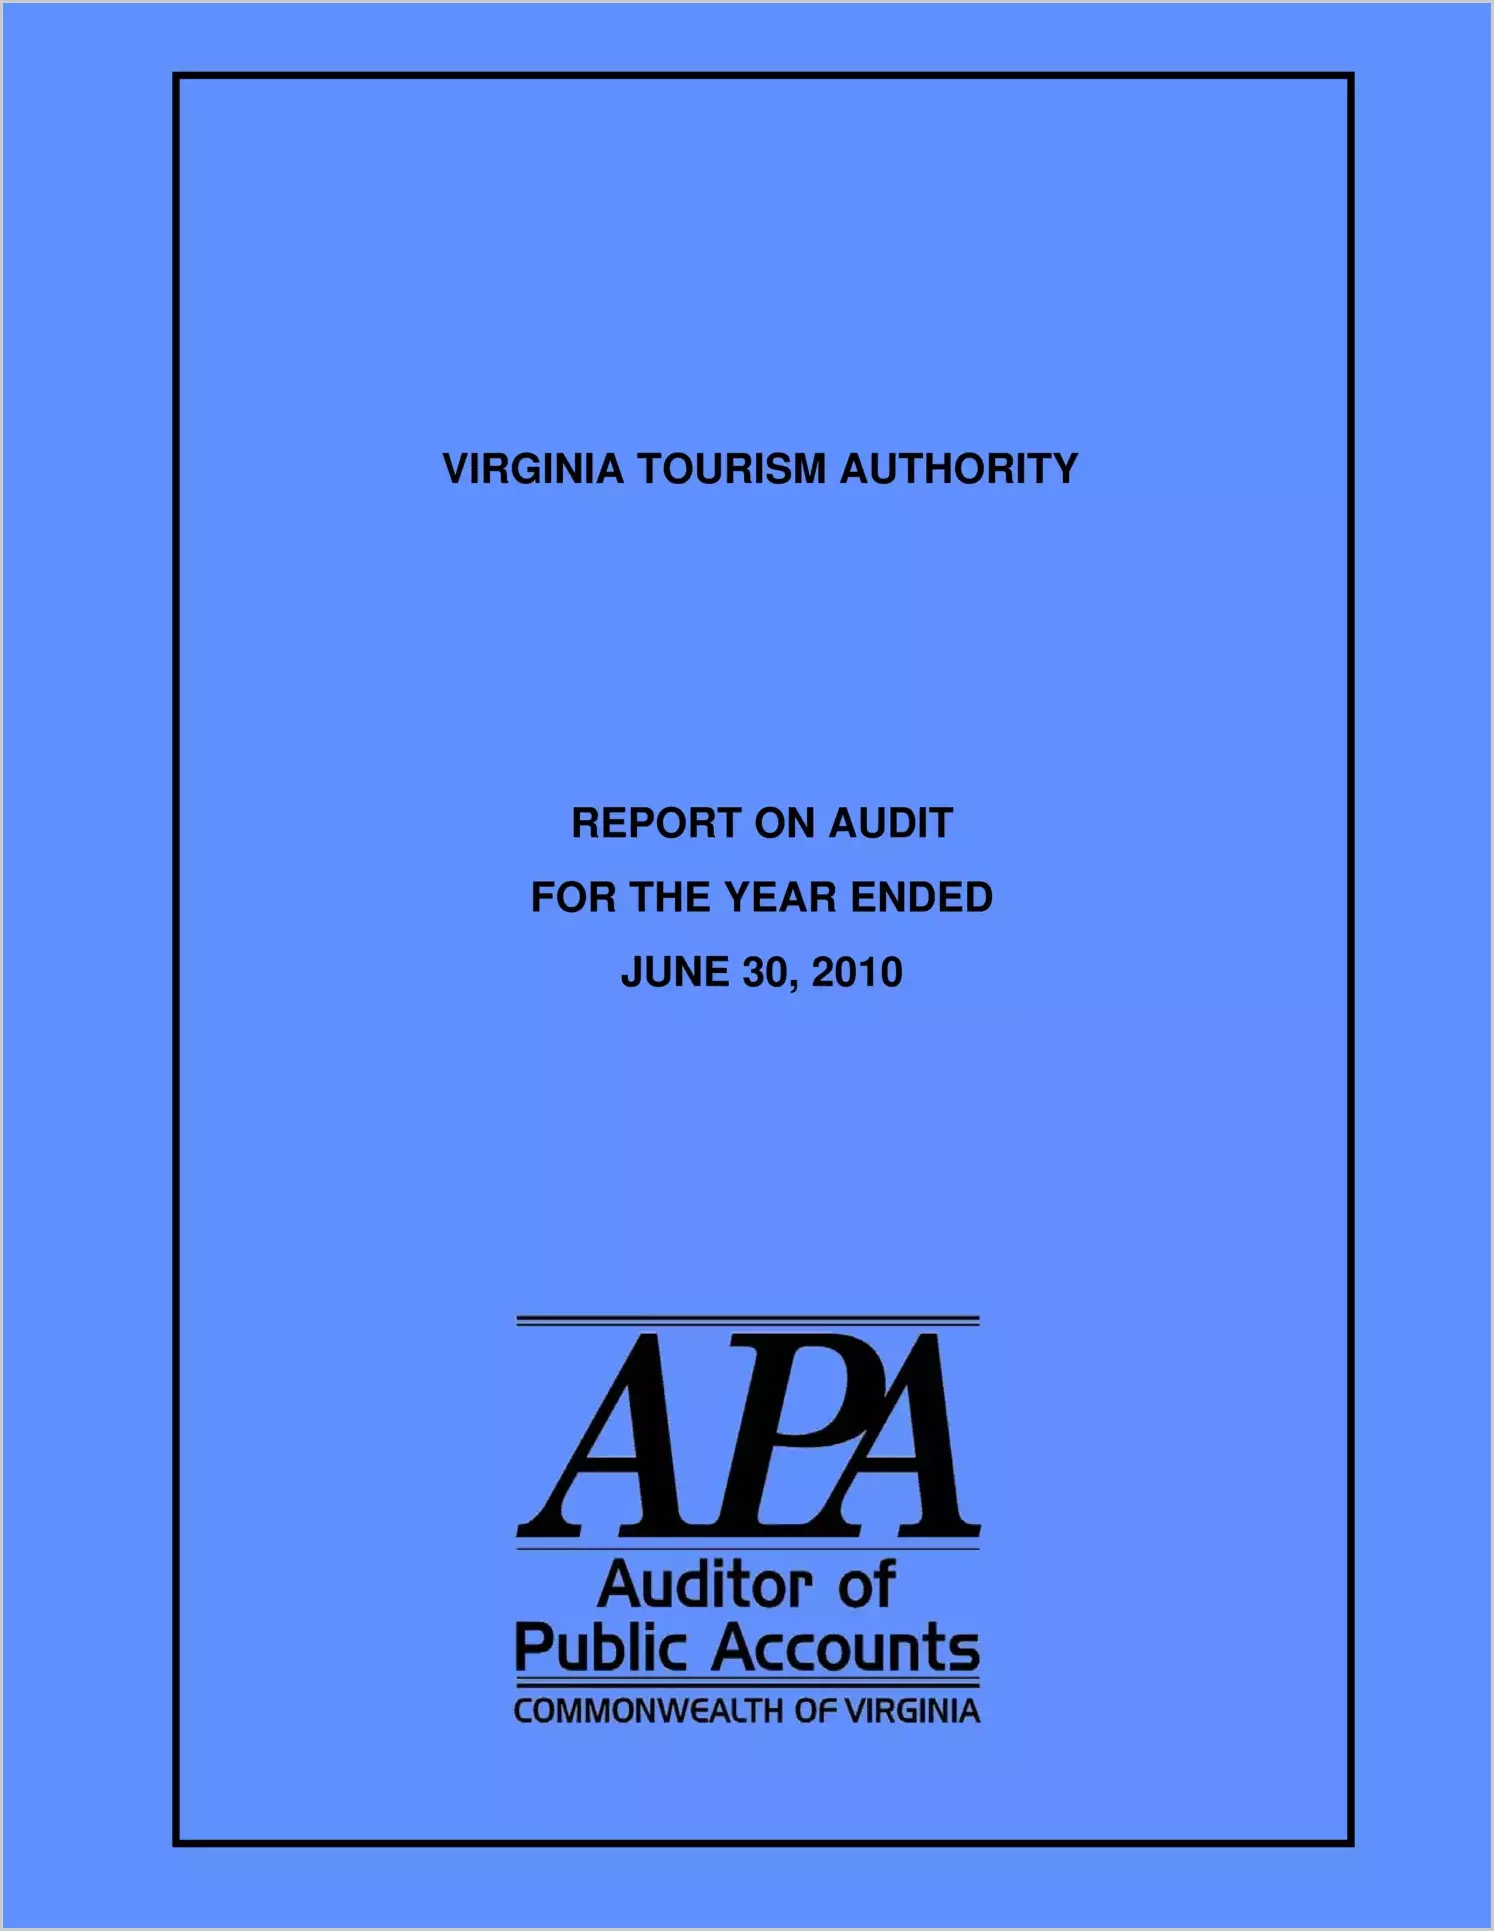 Virginia Tourism Authority for the year ended June 30, 2010